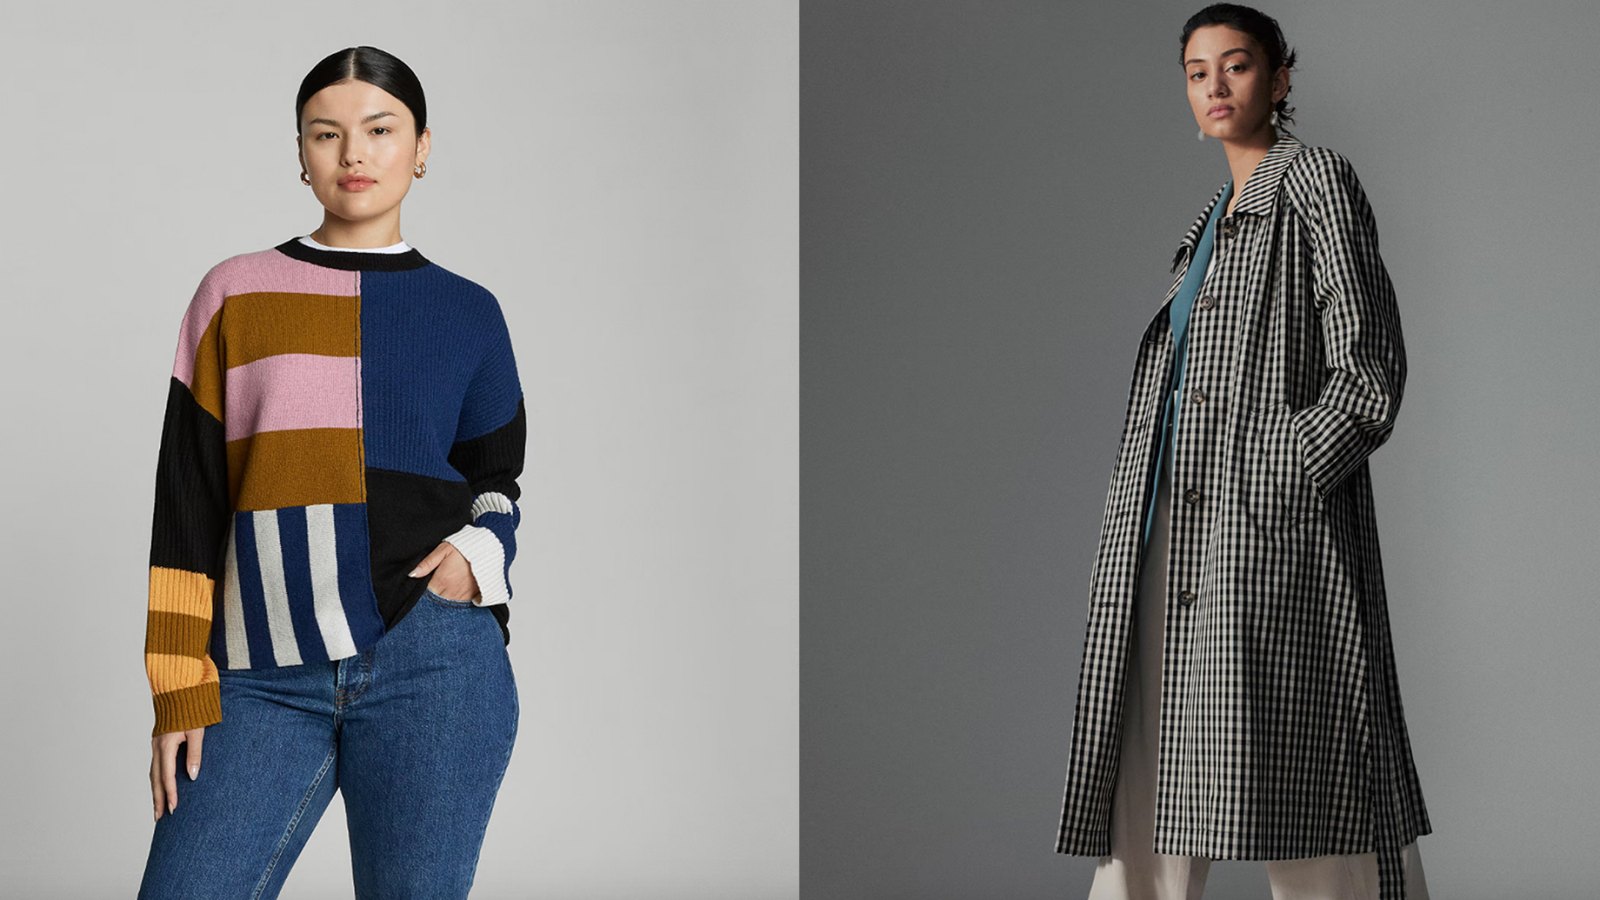 Everlane Sale: Take 30% Off Sweaters and Outerwear